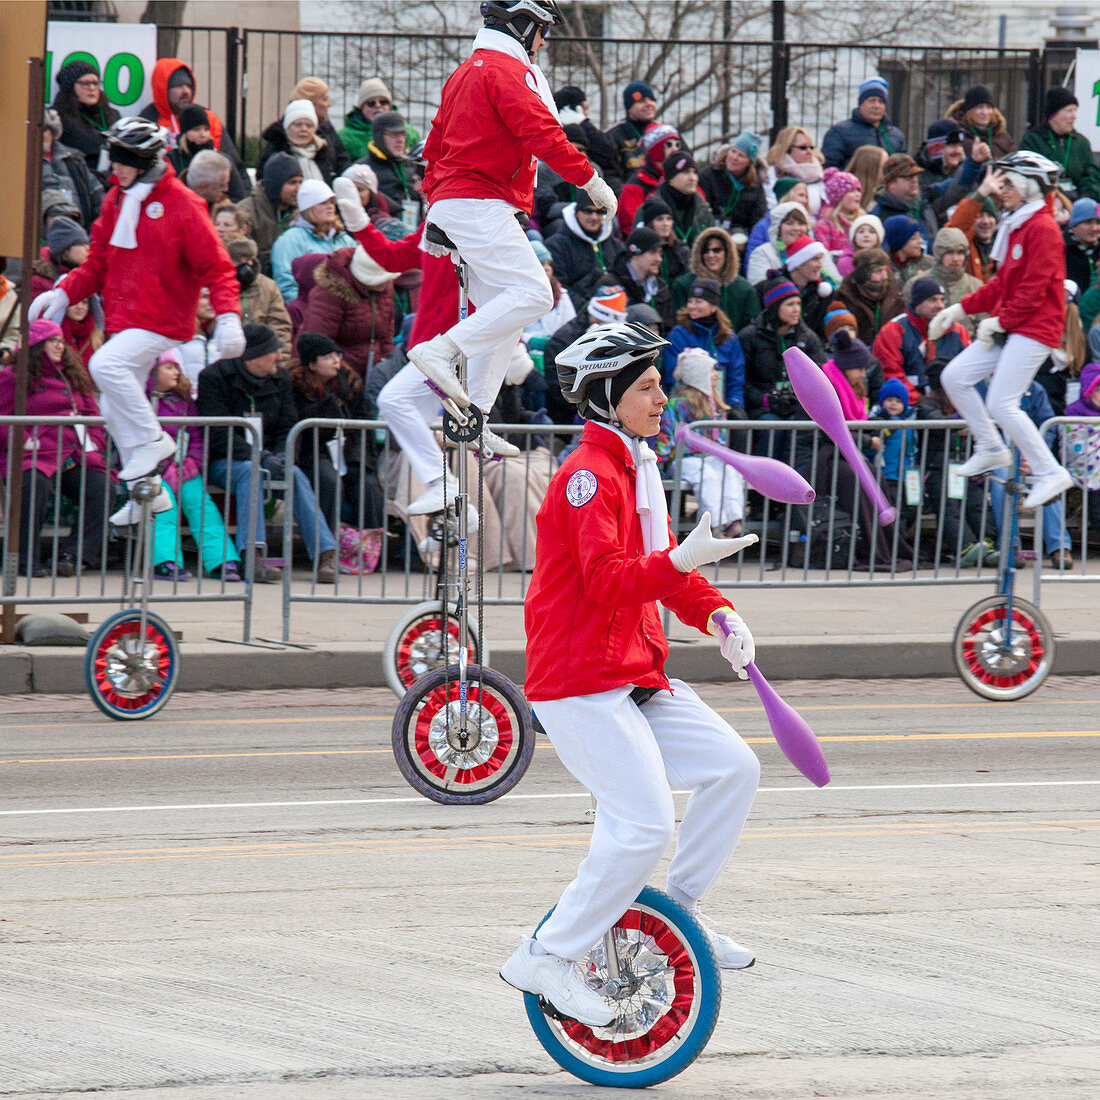 Unicyclists at a parade